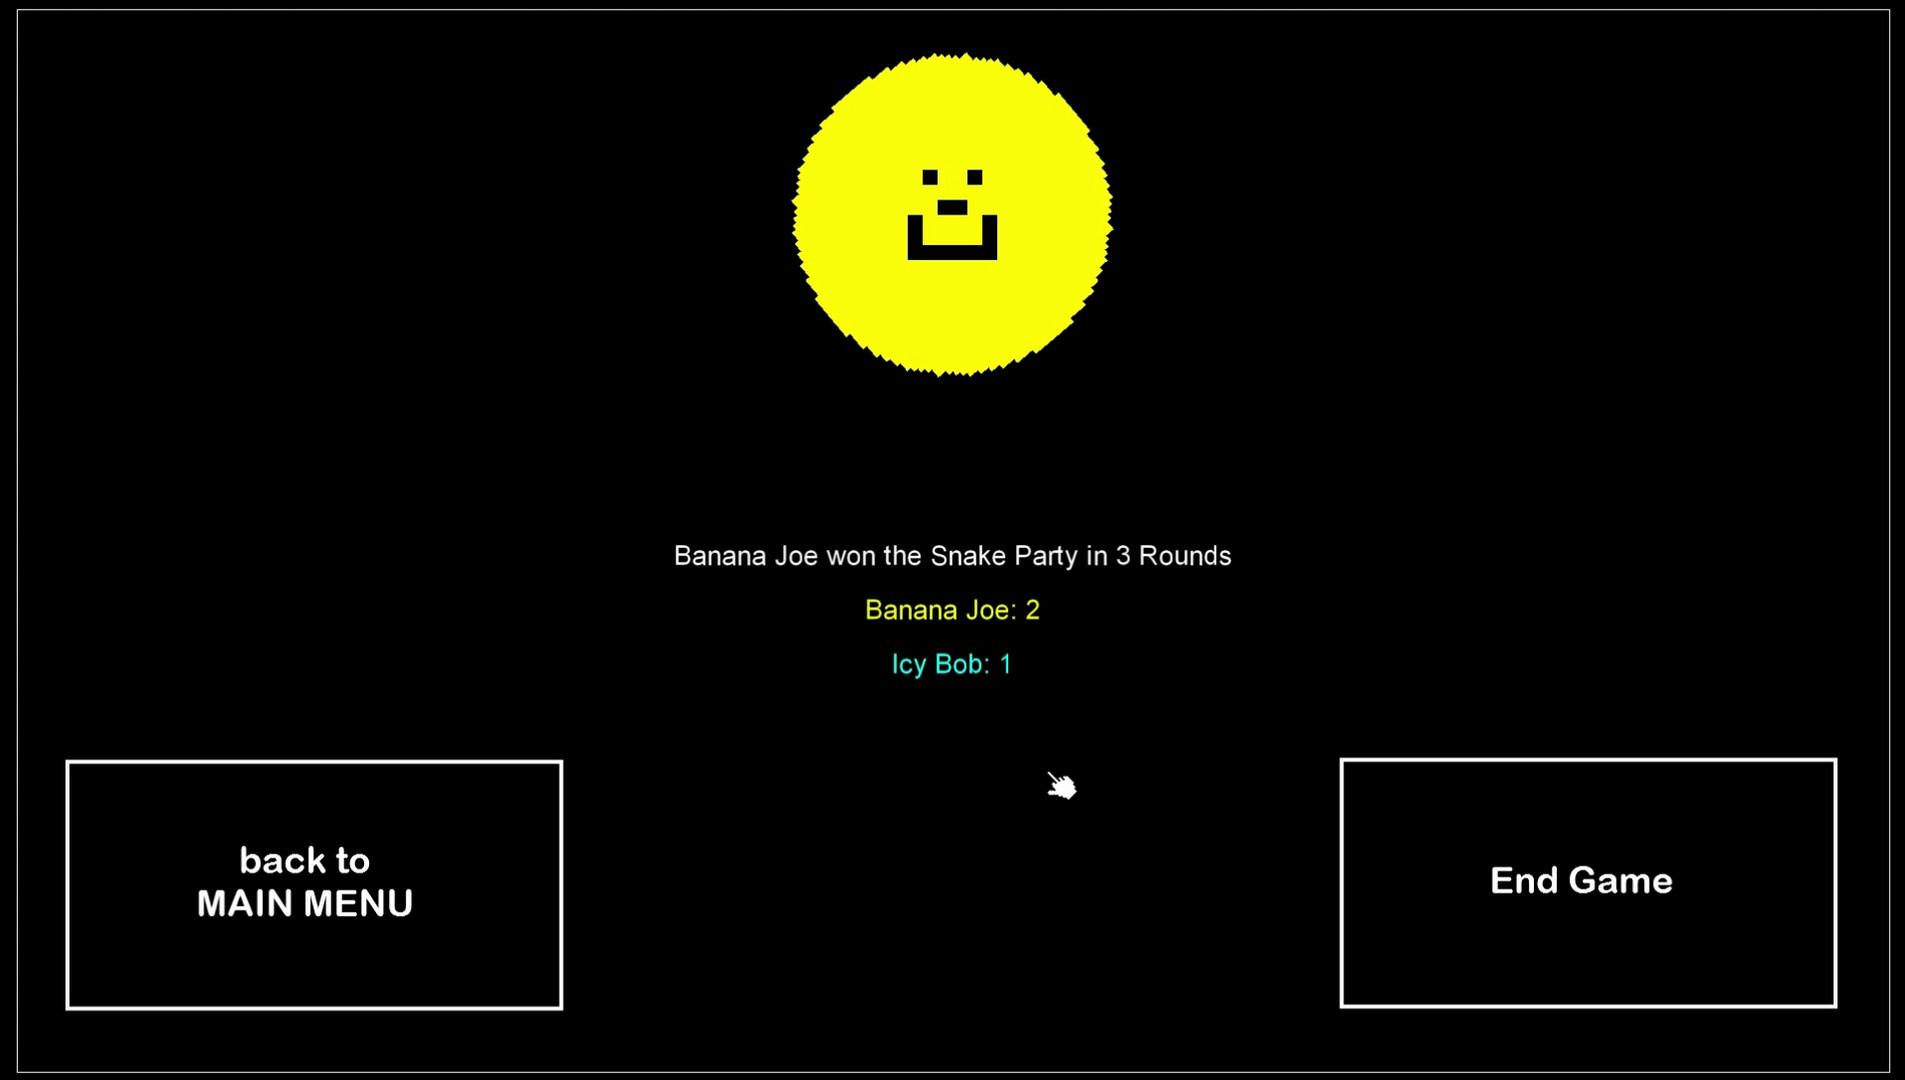 Screenshot №7 from game Snake Party